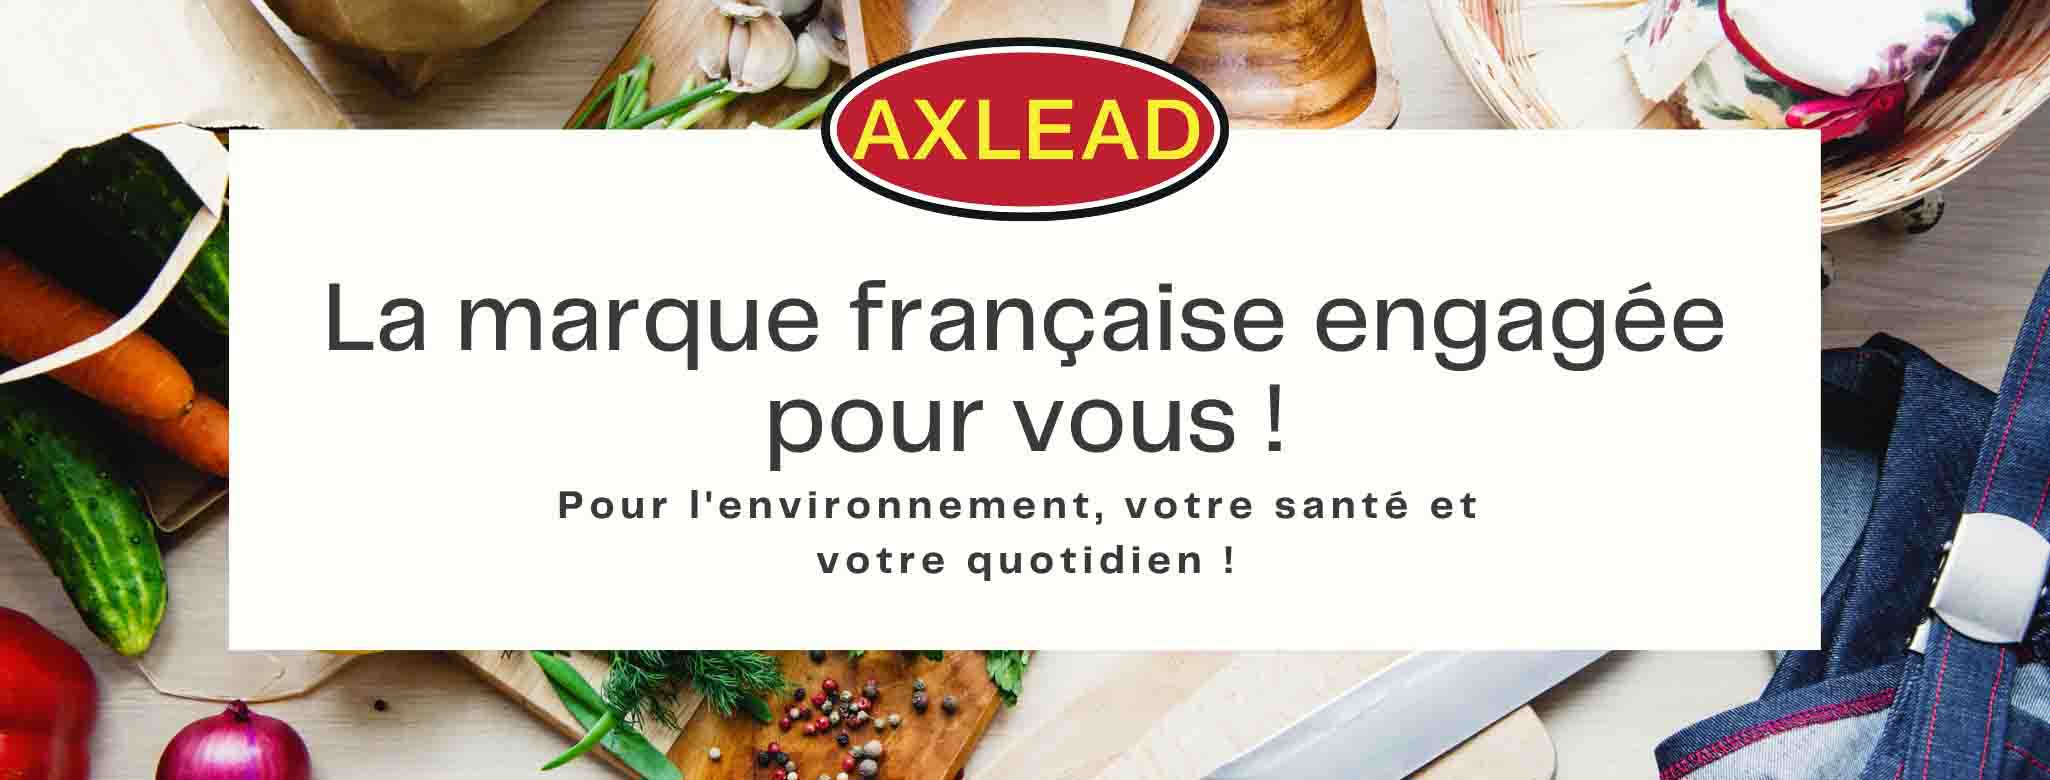 Emballages Éco-responsable - AXLEAD